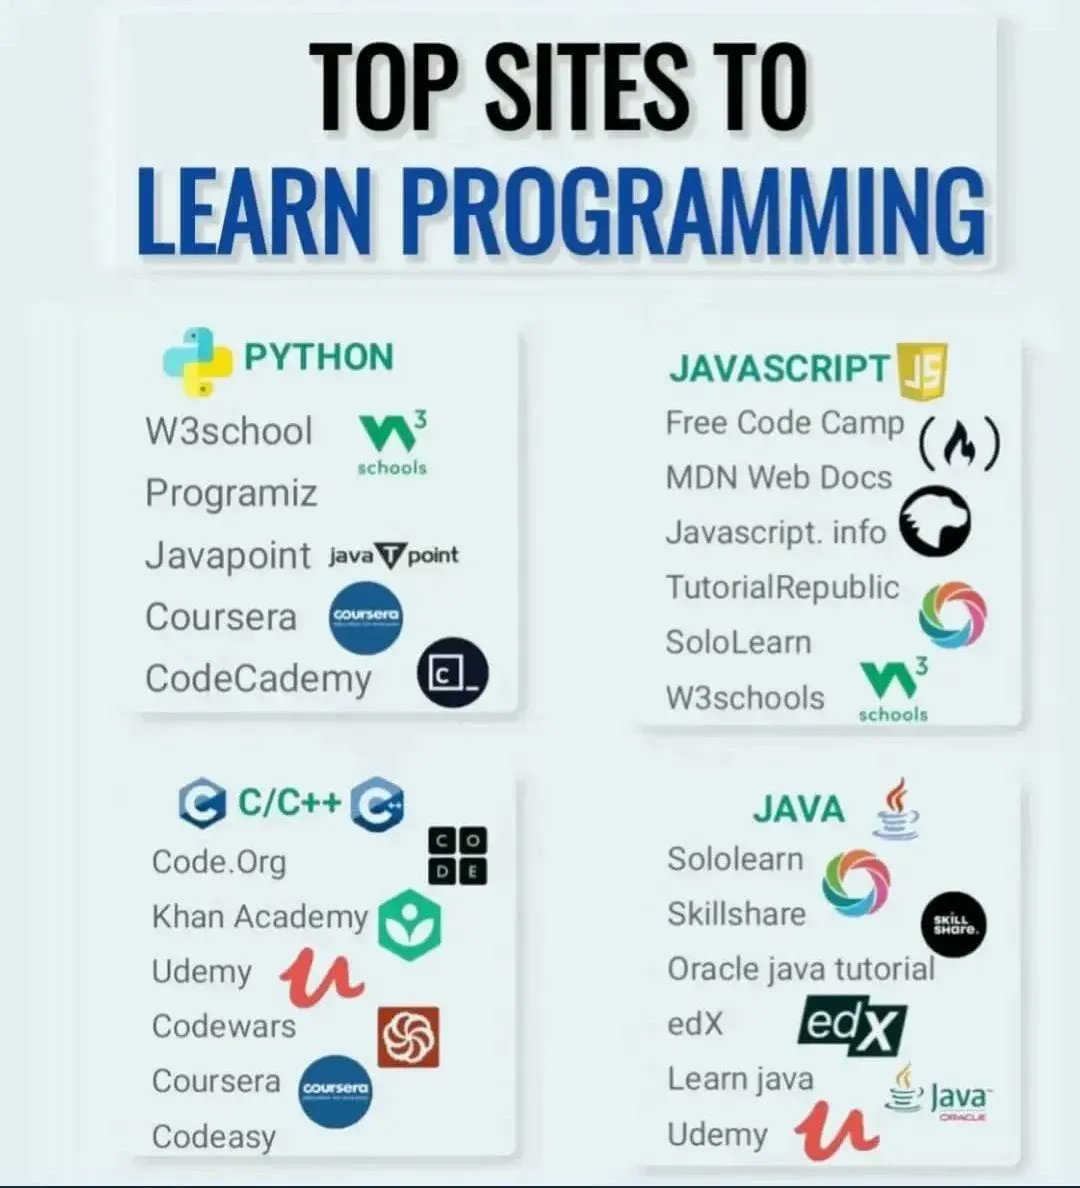 Do you want to learn to code? Don't miss this free opportunity! #DataScience #Cybersecurity #BigData #Analytics #AI #IIoT #Python #RStats #TensorFlow #JavaScript #ReactJS #CloudComputing #DataScientist #Linux #Programming #Coding #100DaysofCode #NodeJS #golang #NLP #GitHub #IoT